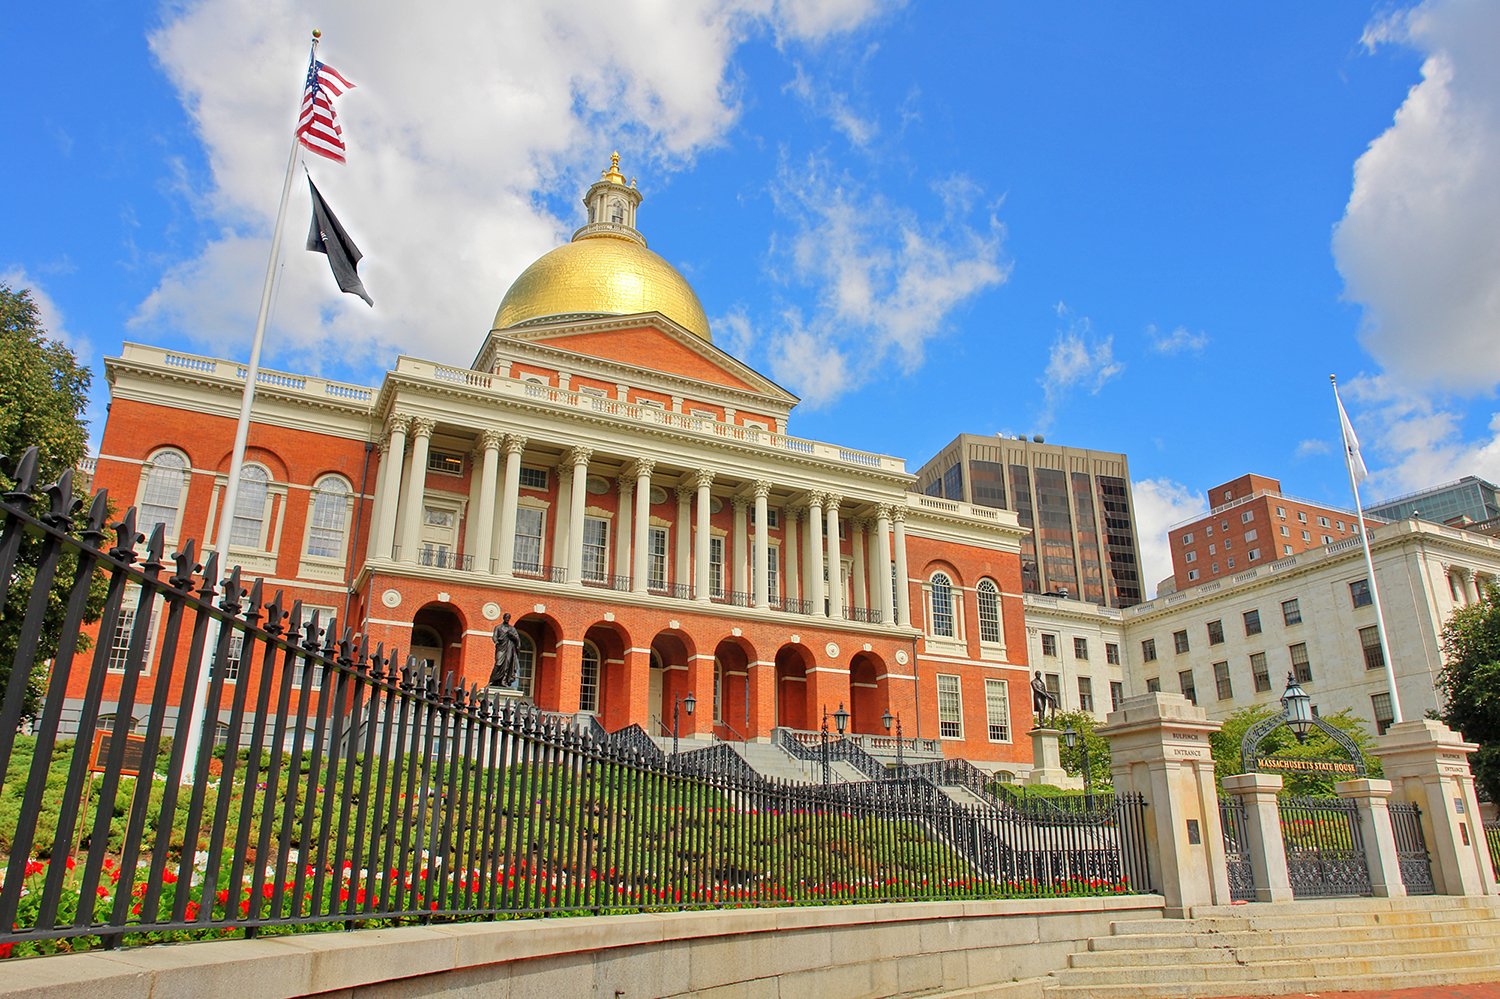 The Massachusetts State House - a state capitol for the Commonwealth of Massachusetts